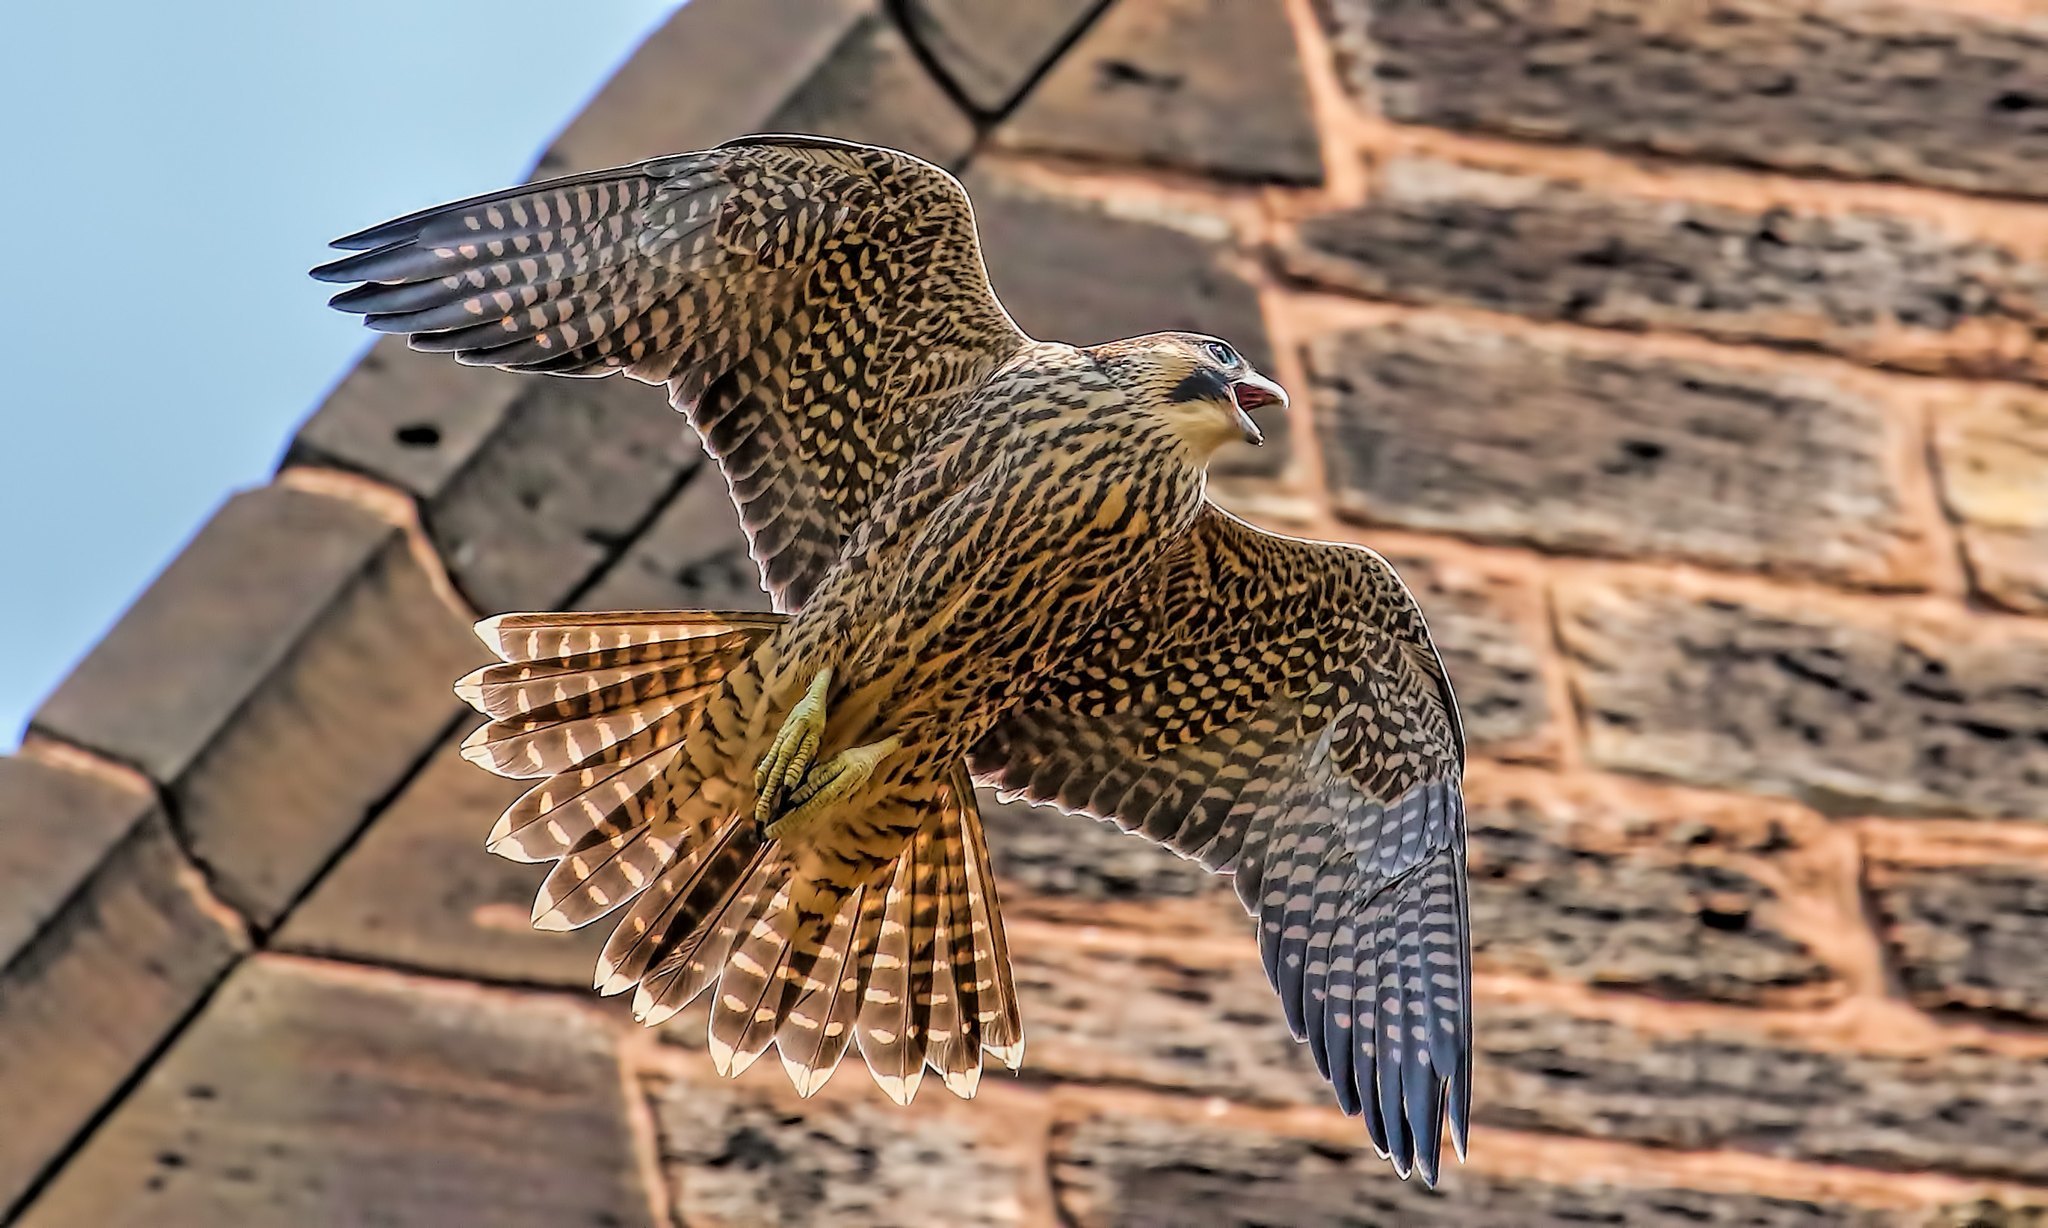 A peregrine falcon at St Chads Church, Kirkby by Ste Jones